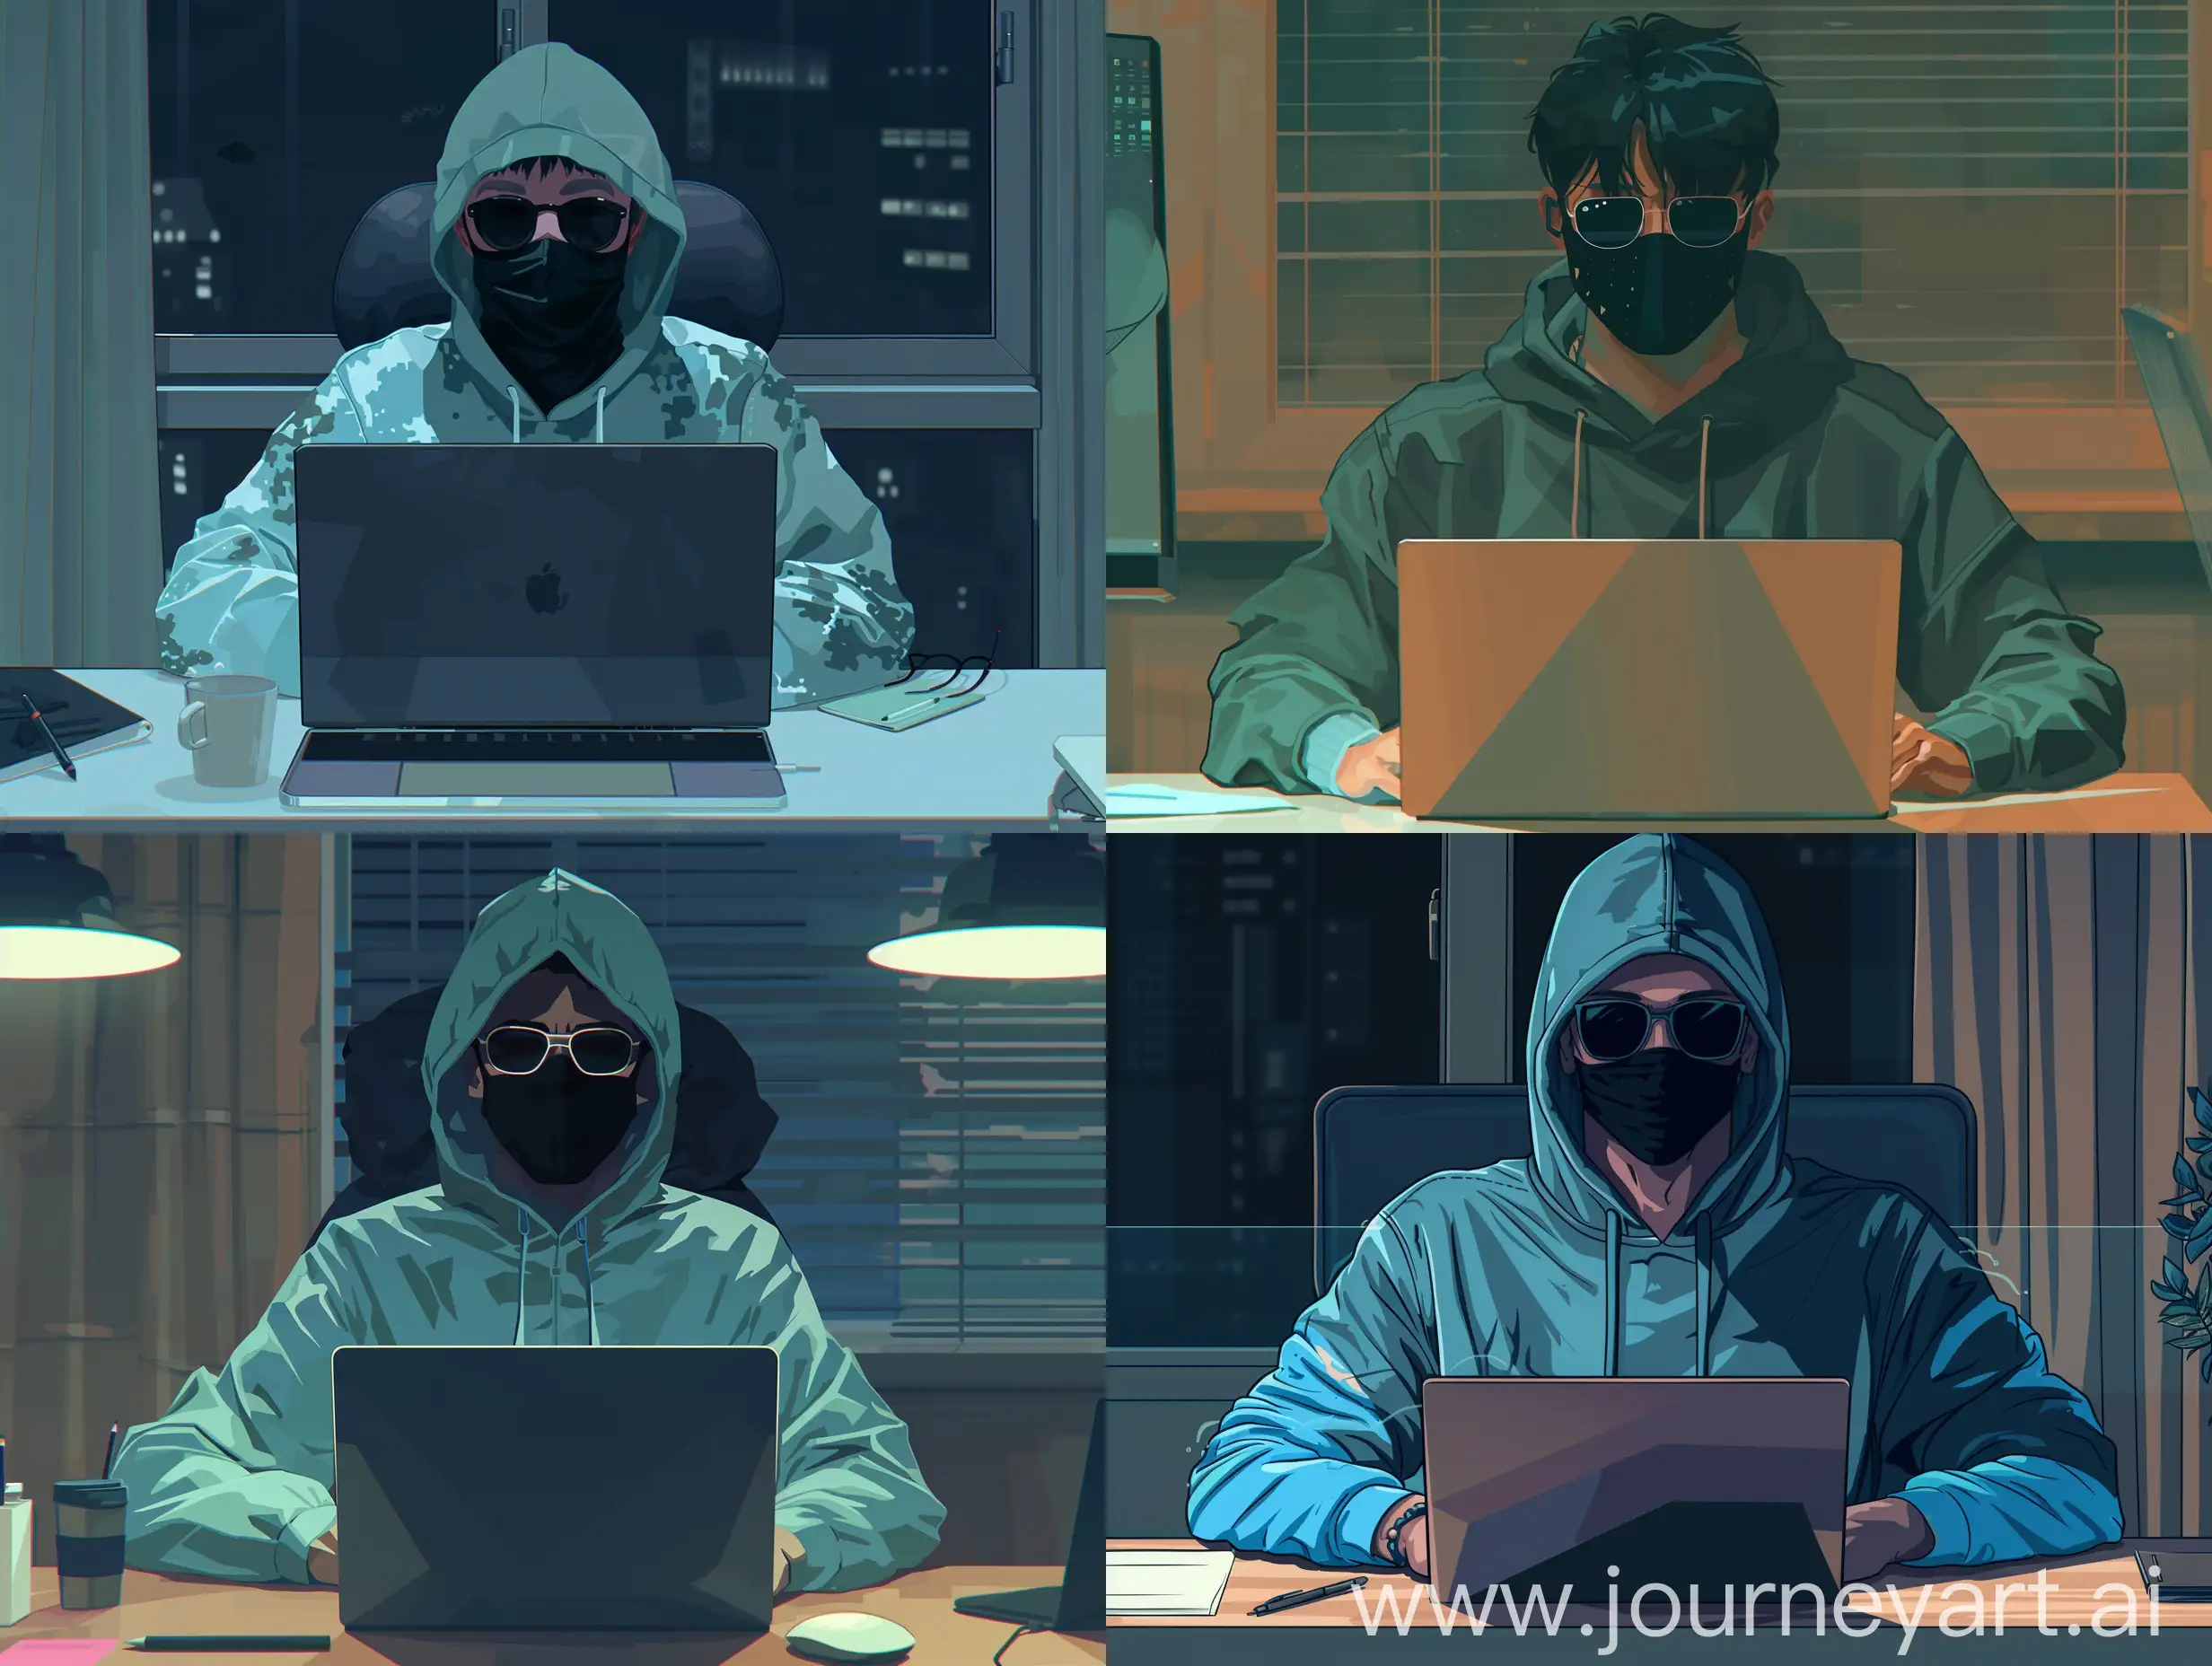 ANIME FRIENDLY LOOKING MALE BUSINESS CHARACTER WHO IS WEARING A BLACK FACE MASK, A Aqua HOODIE AND SUNGLASSES. HE IS SITTING BEHIND HIS LAPTOP IN HIS OFFICE, ARMS ON HIS DESK. IT IS NIGHT. THE ROOM HAS VOLUMETRICLIGHTING. HE IS FRONT FACING TO THE CAMERA, LOOKING STRAICHT AND CENTERED, CENTRAL PORTRAIT, SITTING STRAIGHT, FRONT VIEW, CENTERED LOOKING STRAIGHT. THE OVERALL AMBIANCE OF THE IMAGE SHOULD CONVEY A CONNECTION TO MINIMALISM, FLAT ILLUSTRATION, BOLD LINE, MINIMALISM, SIMPLIFIED, GOUACHE ILLUSTRATION. 8K RESOLUTION